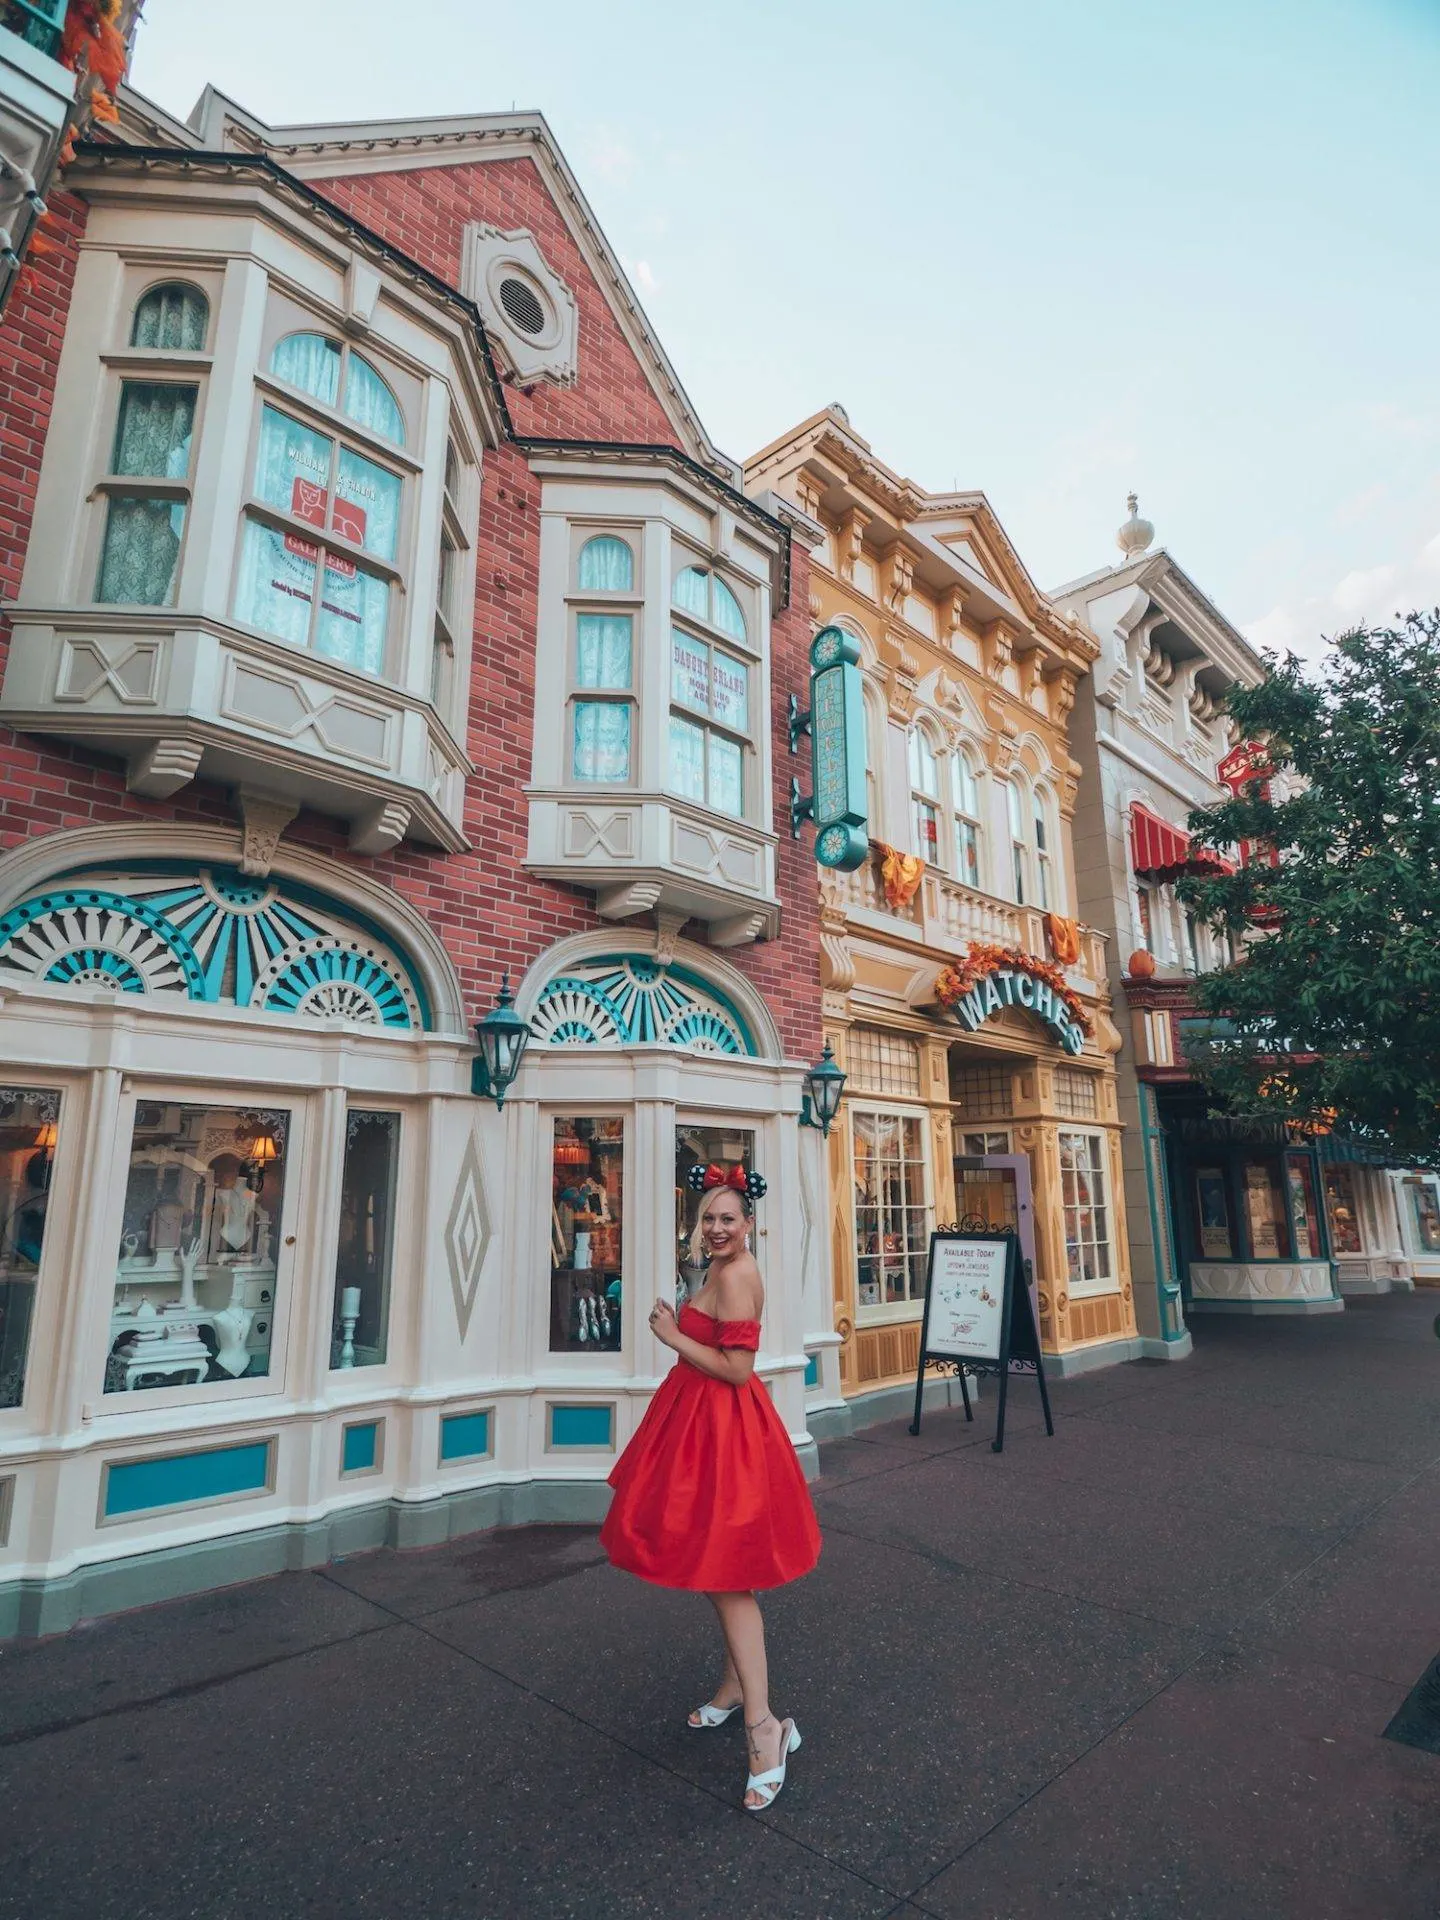 Main Street USA at Disney World in Florida! Click the photo for a complete guide on how to get the perfect photo at Disney! Includes a list of all the top Disney World photo spots. via www.kirstenwendlandt.com